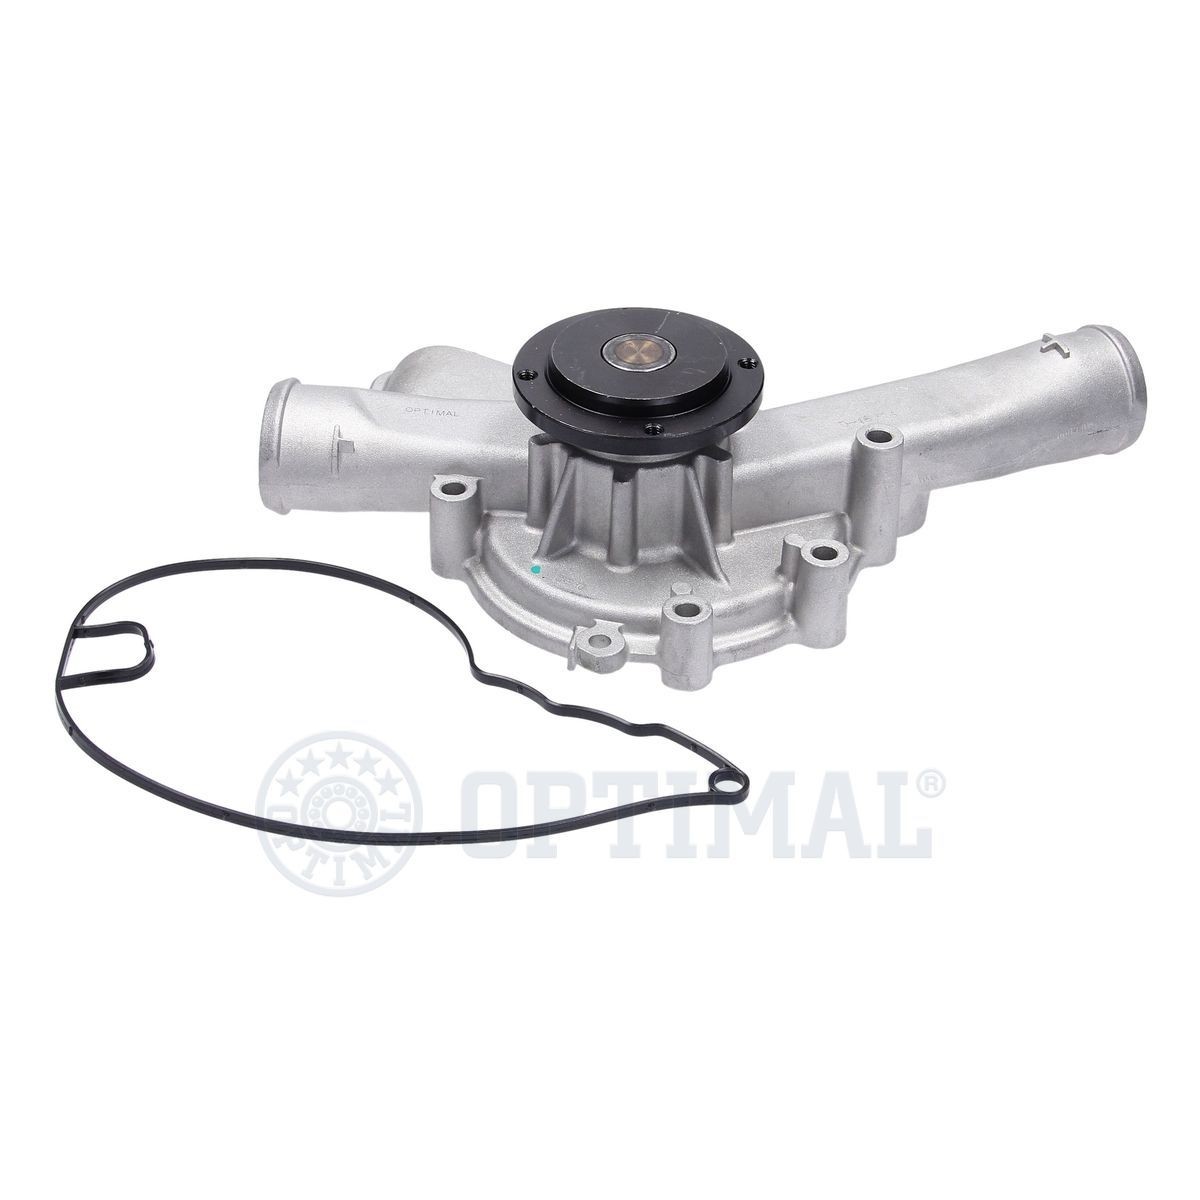 OPTIMAL AQ-2311 Water pump with seal, Mechanical